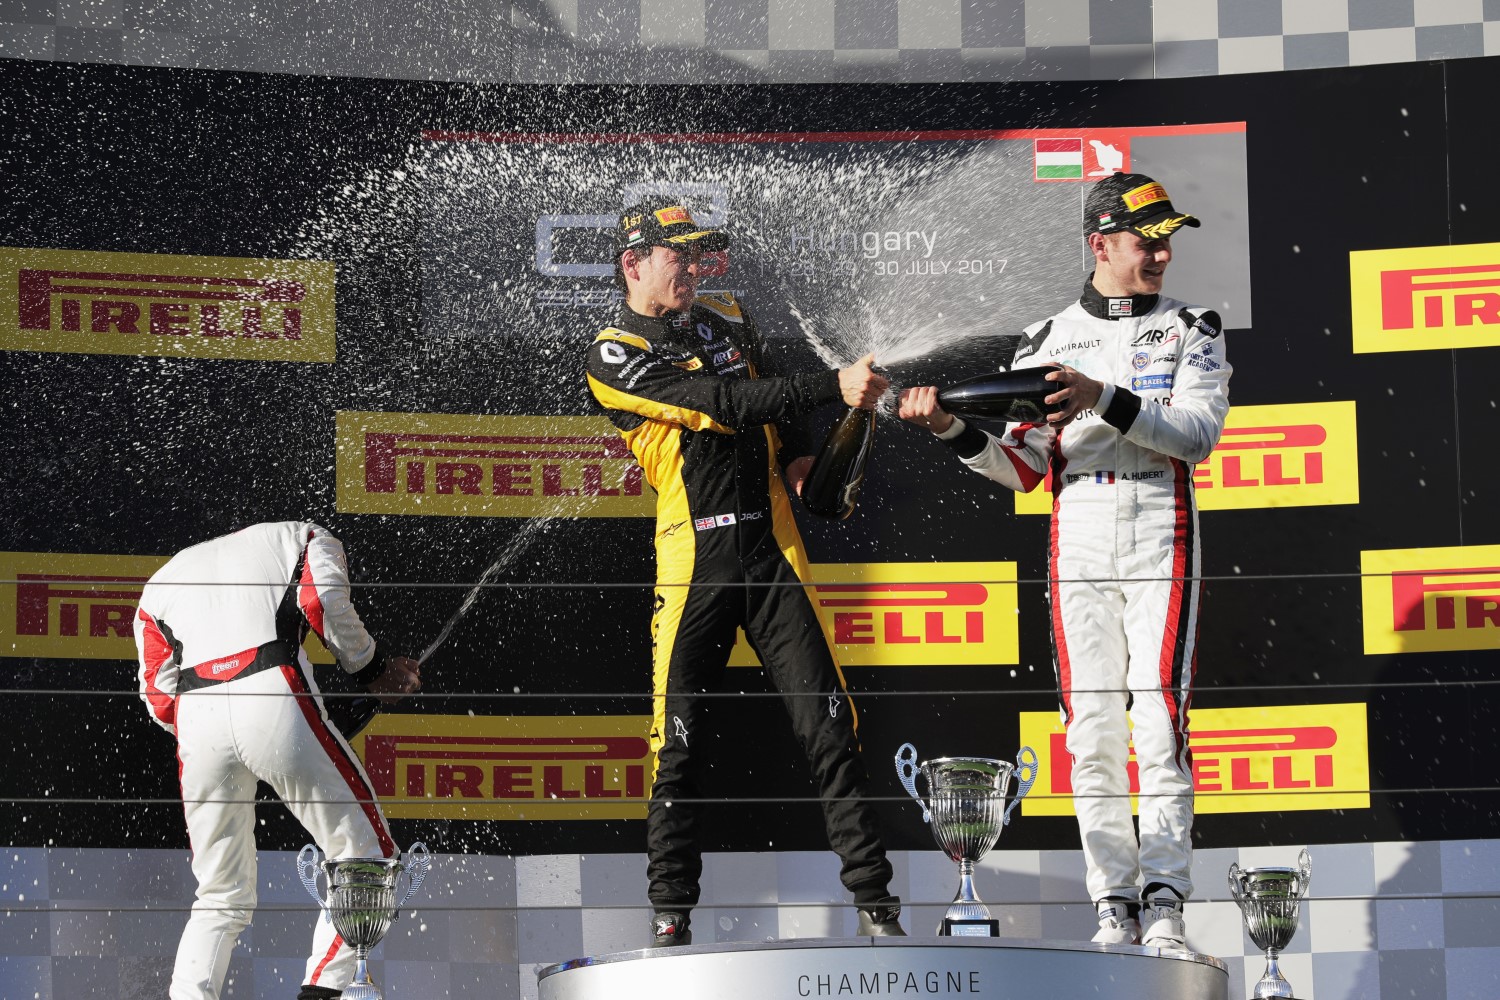 Top-3 spray the champagne